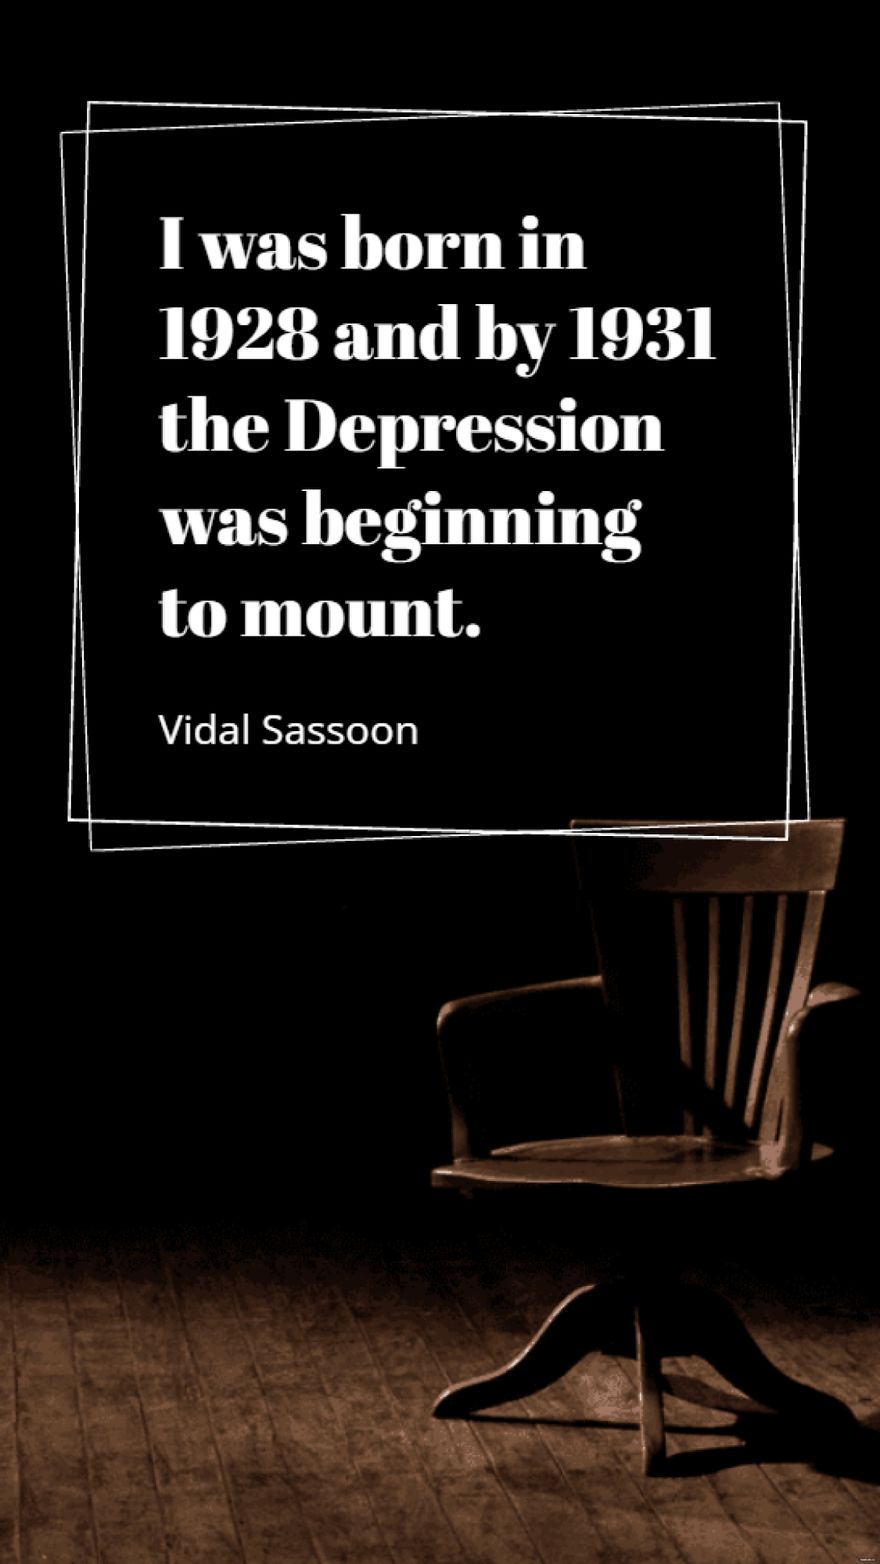 Vidal Sassoon - I was born in 1928 and by 1931 the Depression was beginning to mount.